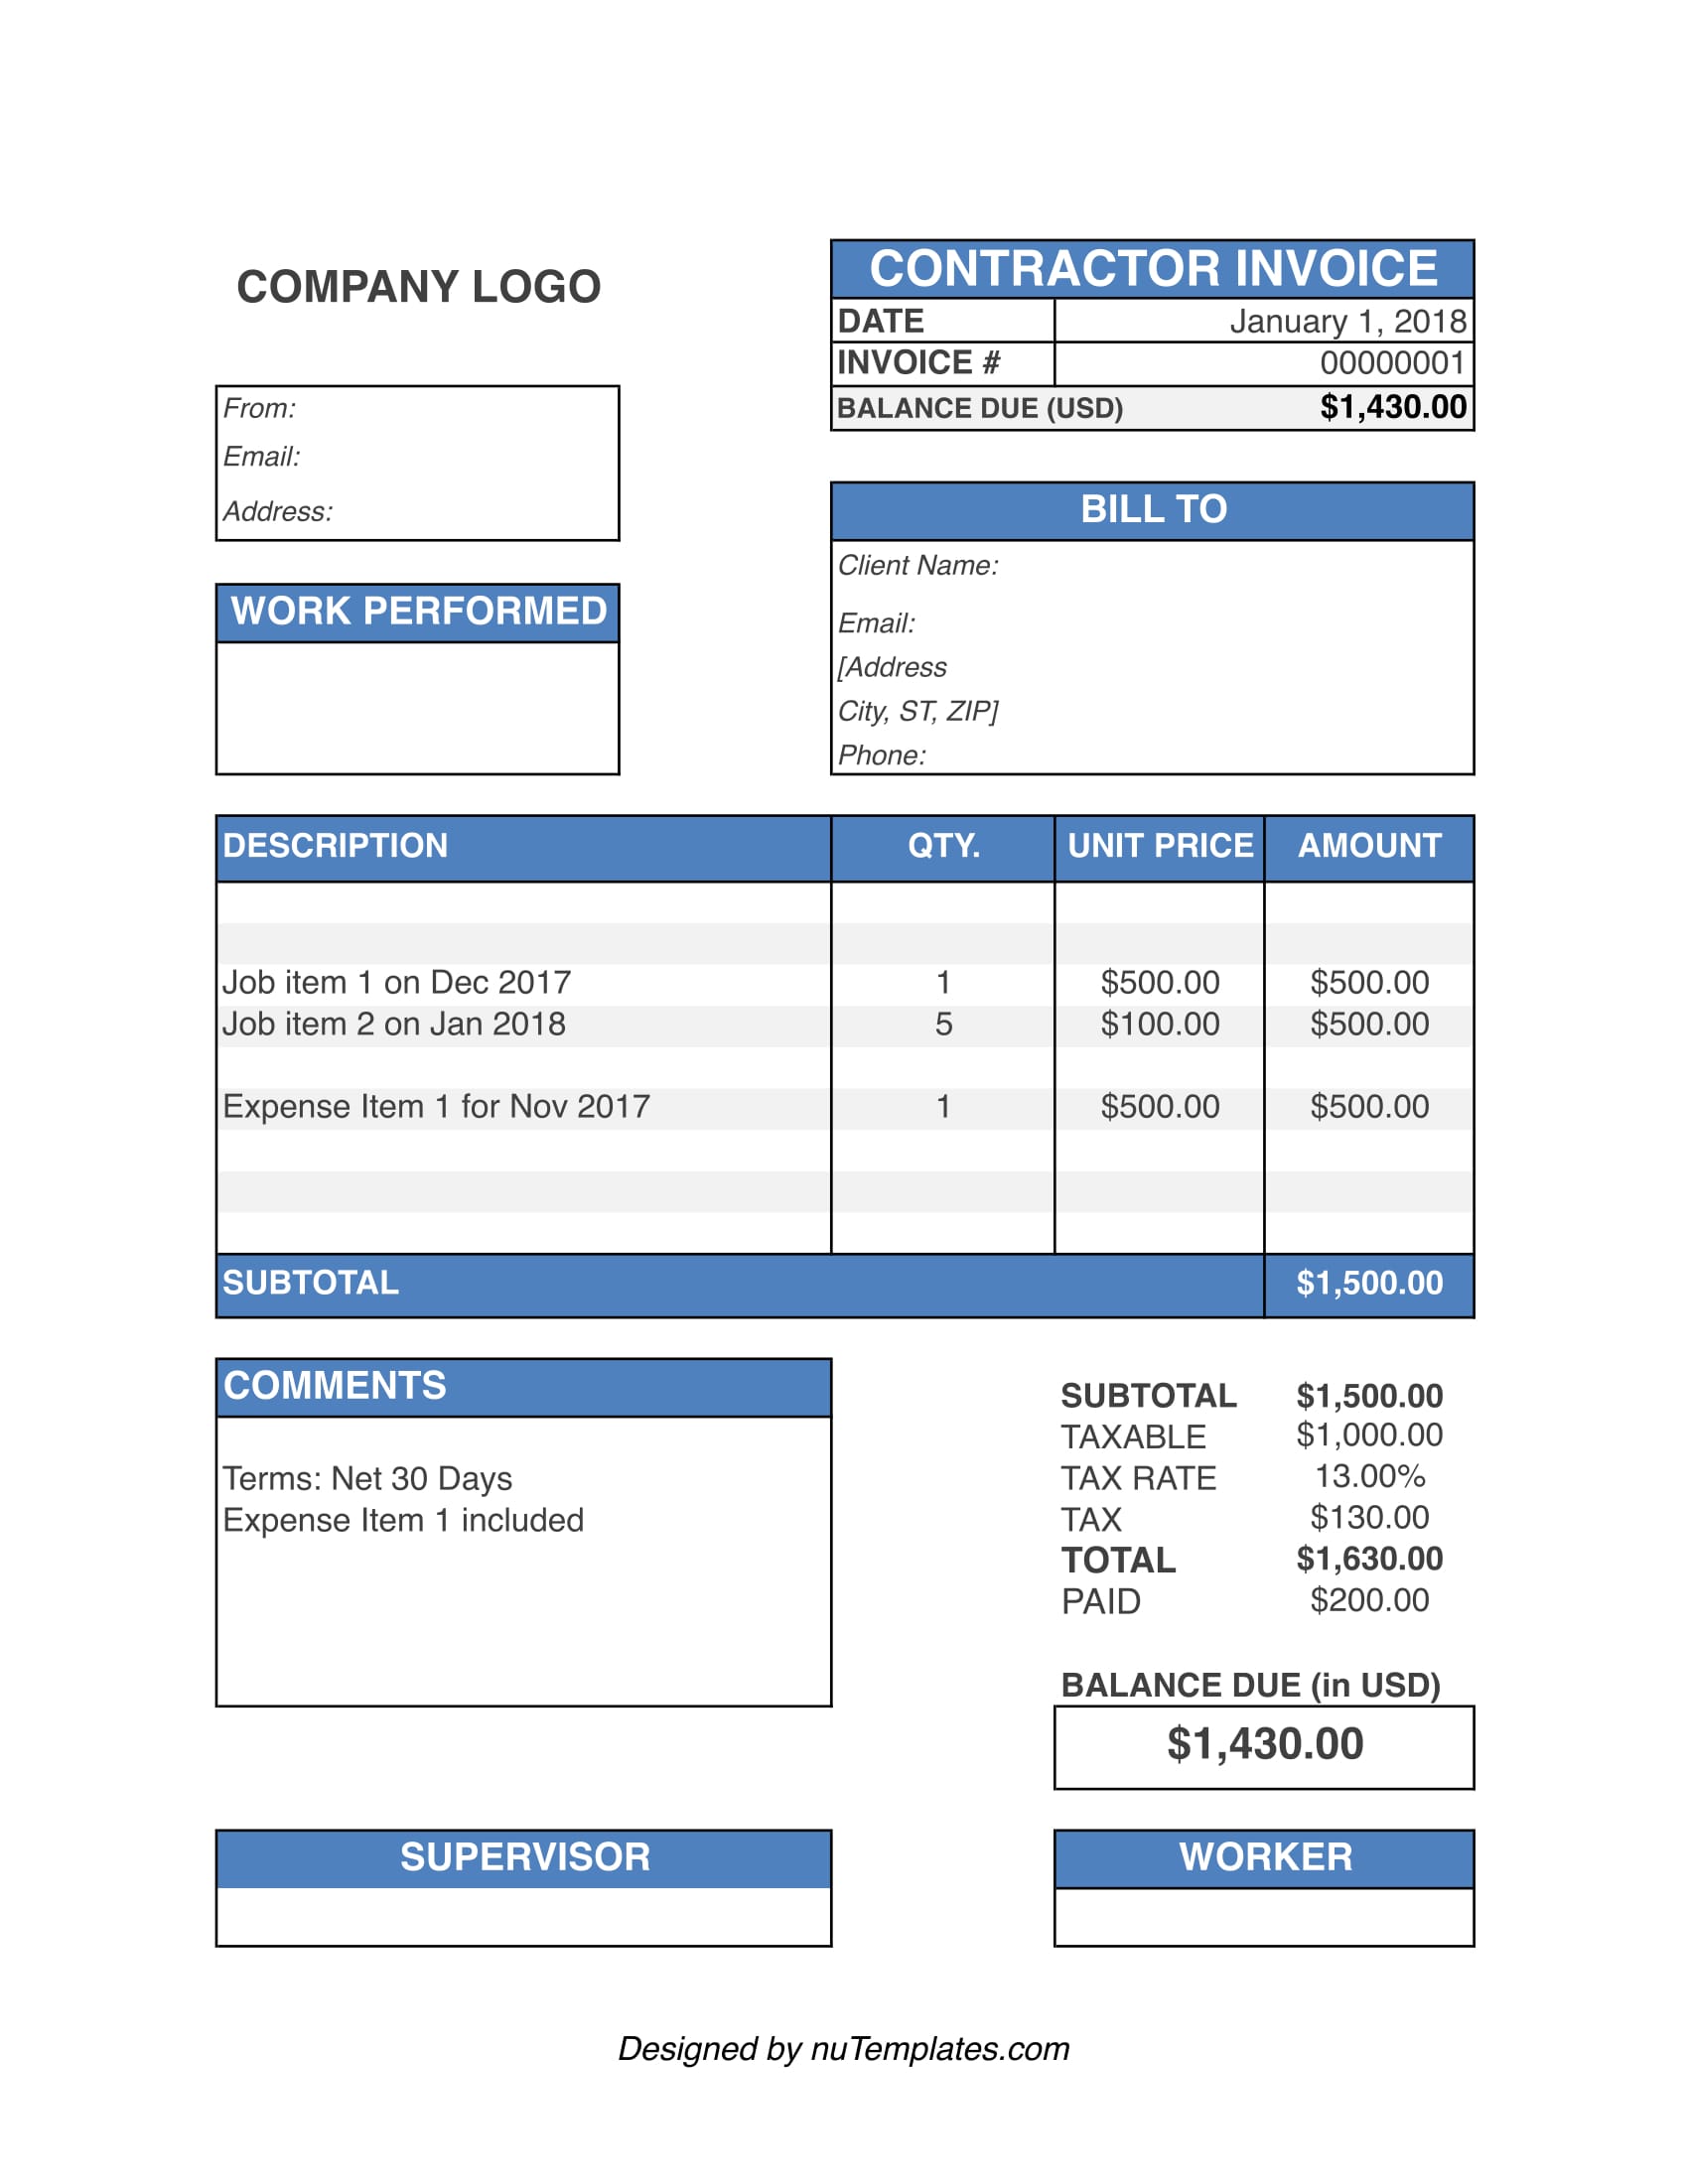 contractor-invoice-template-contractor-invoices-nutemplates